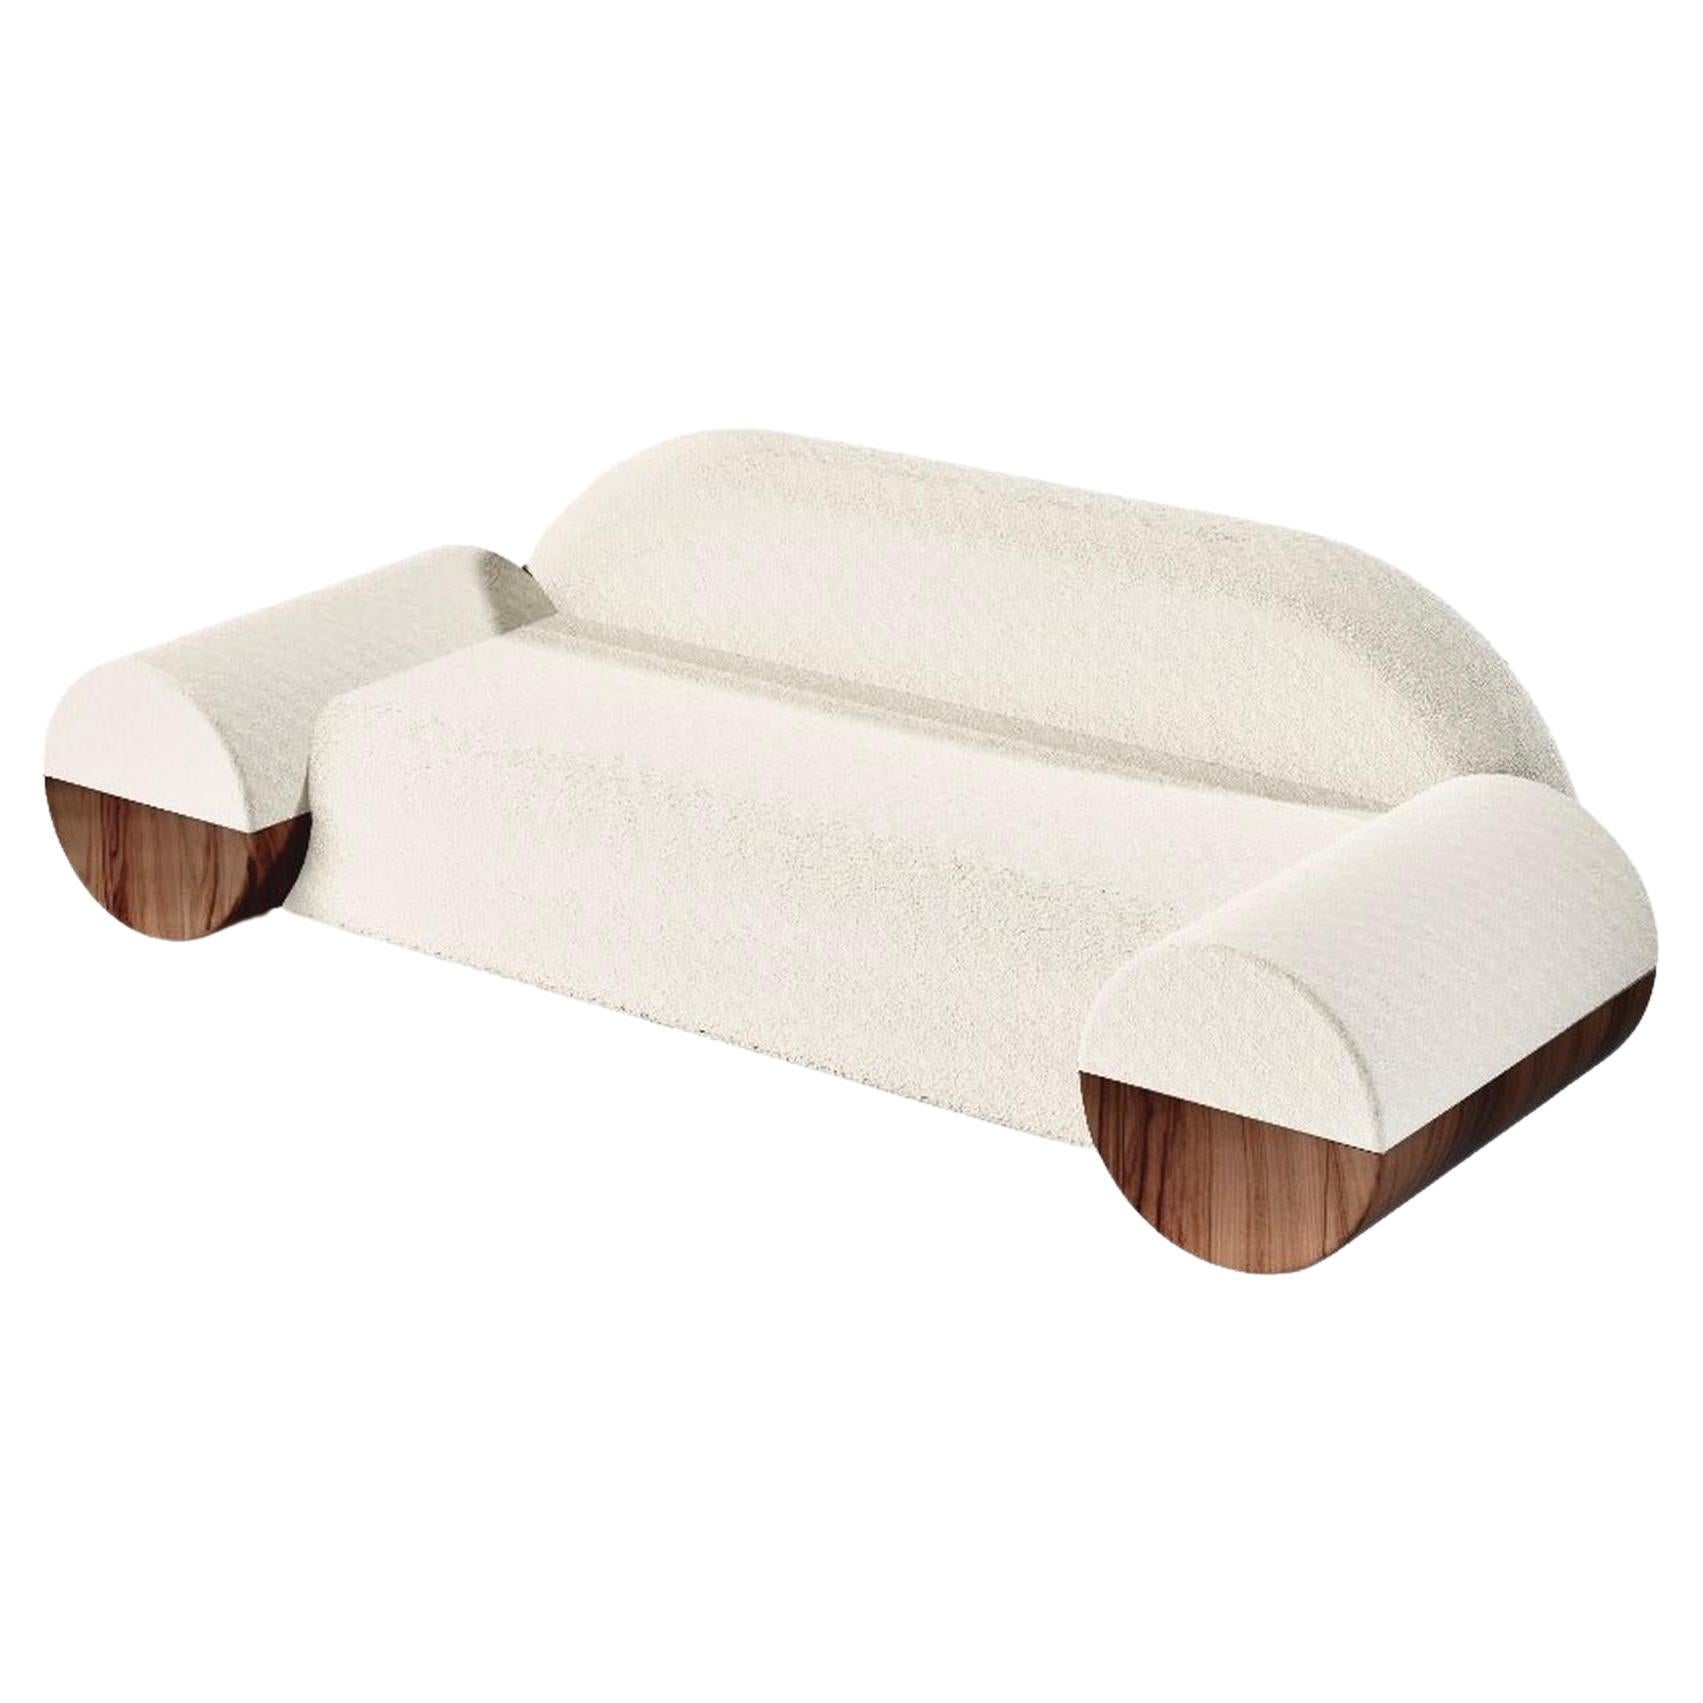 Kasa Sofa 2p by Kasadamo, Bouclé Cream with Wooden Finishes Version For Sale